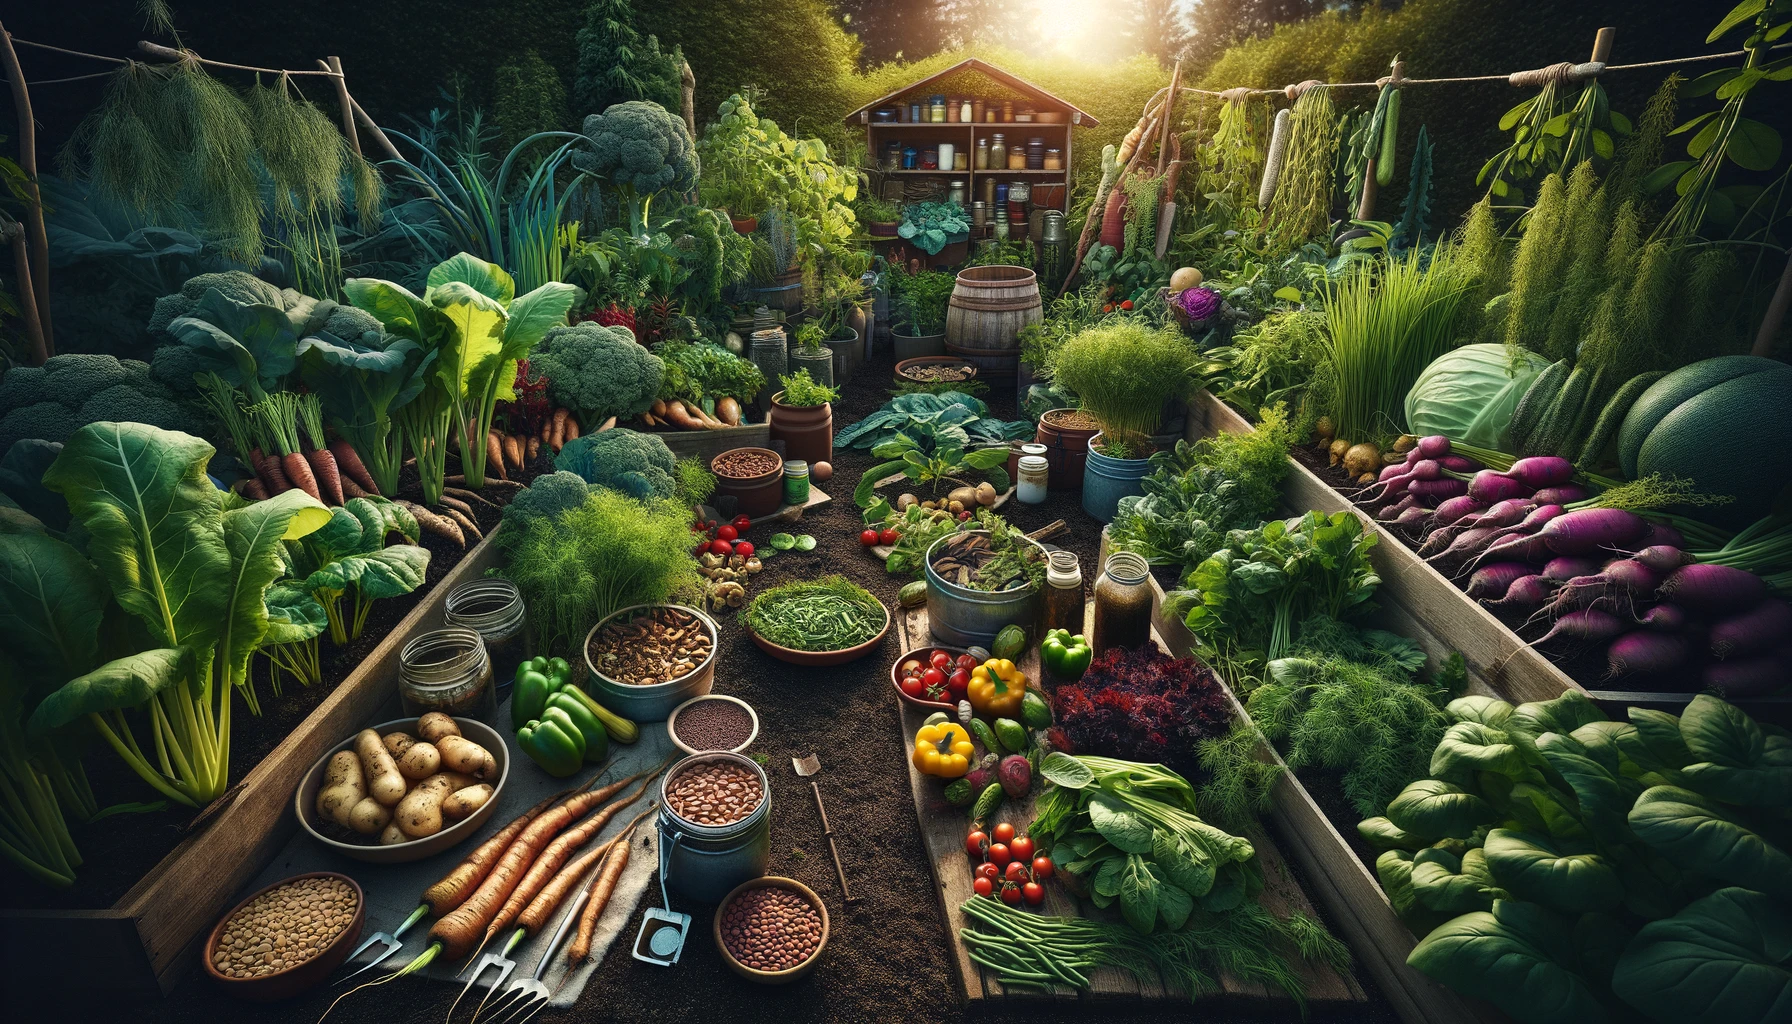 A variety of essential survival garden crops thriving in a well-organized setting, showcasing nutritional value and sustainability for resilience and self-reliance